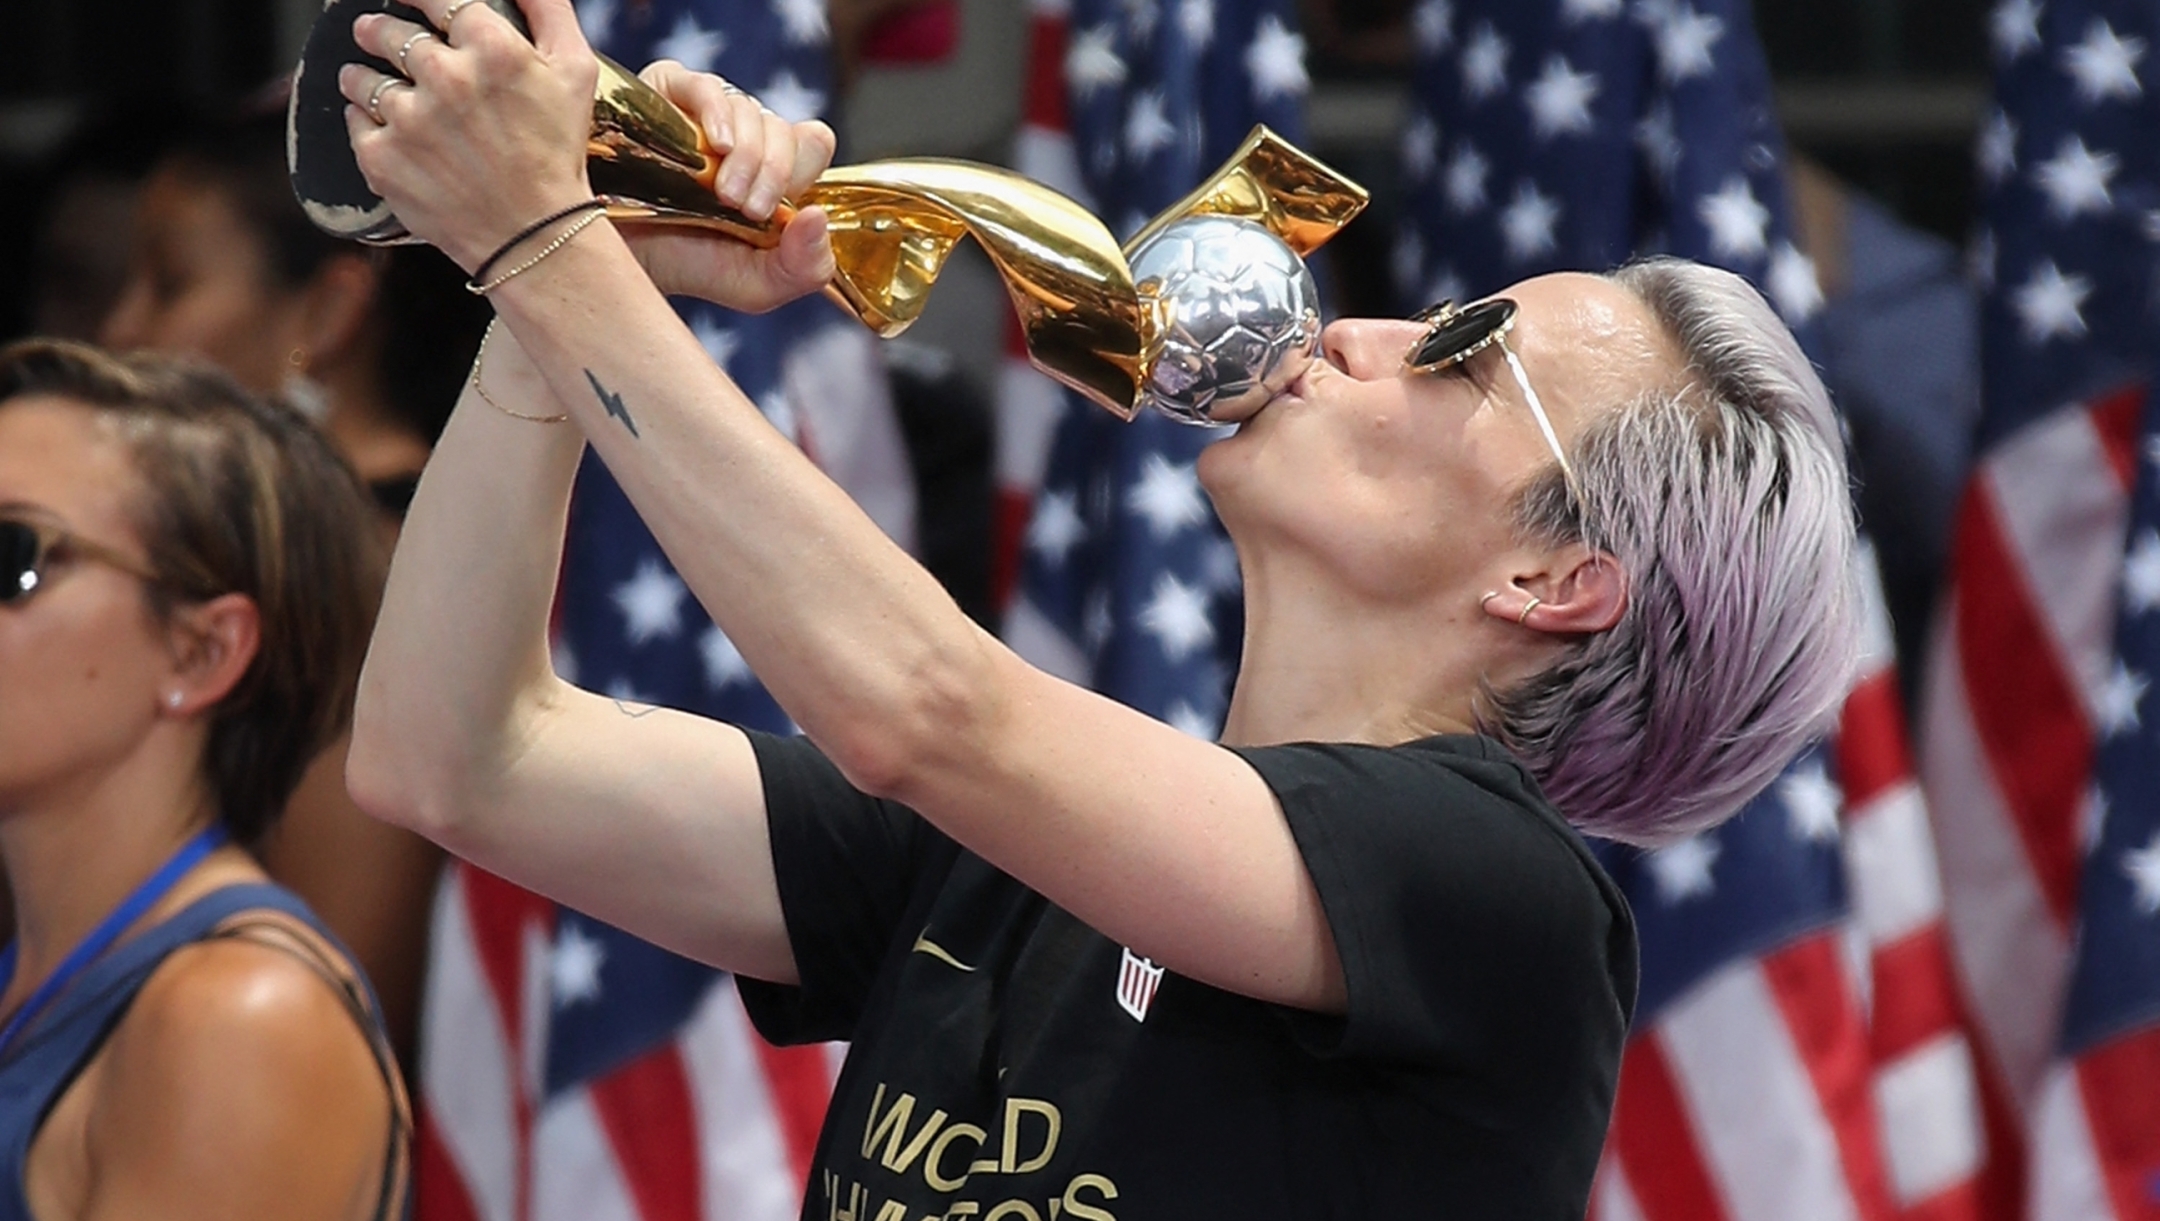 NEW YORK, NEW YORK - JULY 10: Megan Rapinoe and members of the United States Women's National Soccer Team are honored at a ceremony at City Hall on July 10, 2019 in New York City. The honor followed a ticker tape parade up lower Manhattan's "Canyon of Heroes" to celebrate their gold medal victory in the 2019 Women's World Cup in France.   Bruce Bennett/Getty Images/AFP (Photo by BRUCE BENNETT / GETTY IMAGES NORTH AMERICA / Getty Images via AFP)